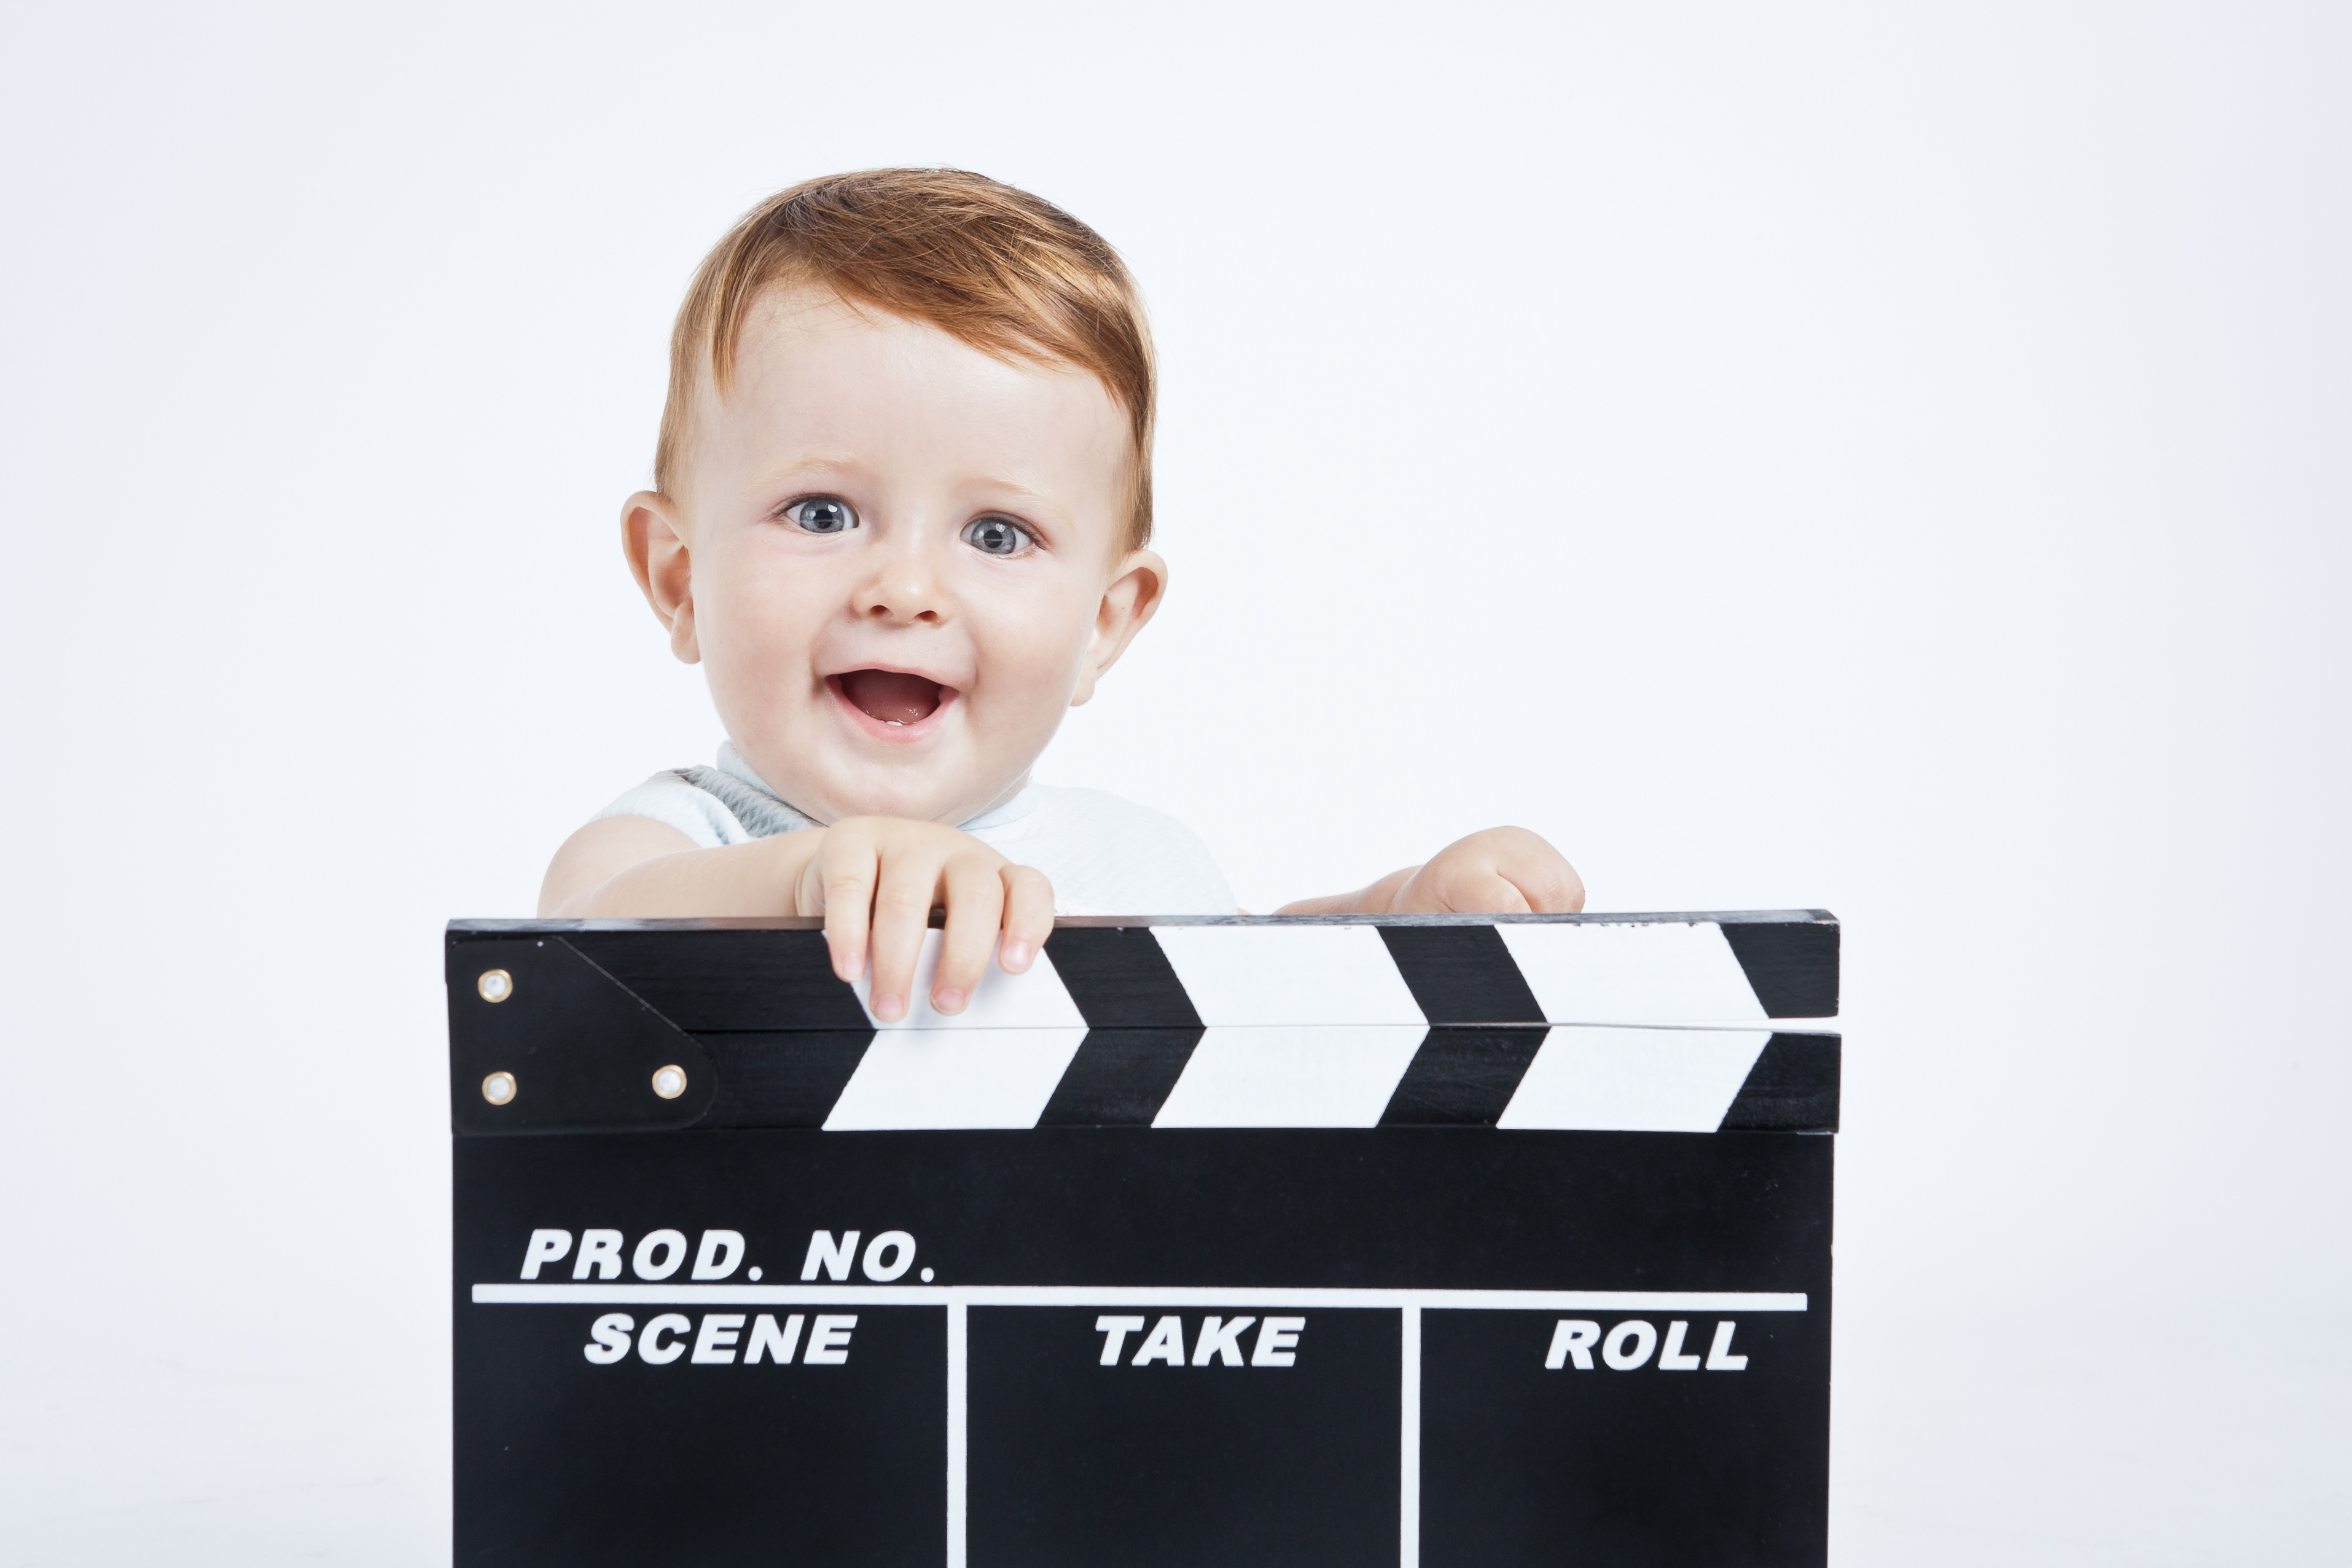 Irish casting agency have put out a casting call for male babies and toddlers